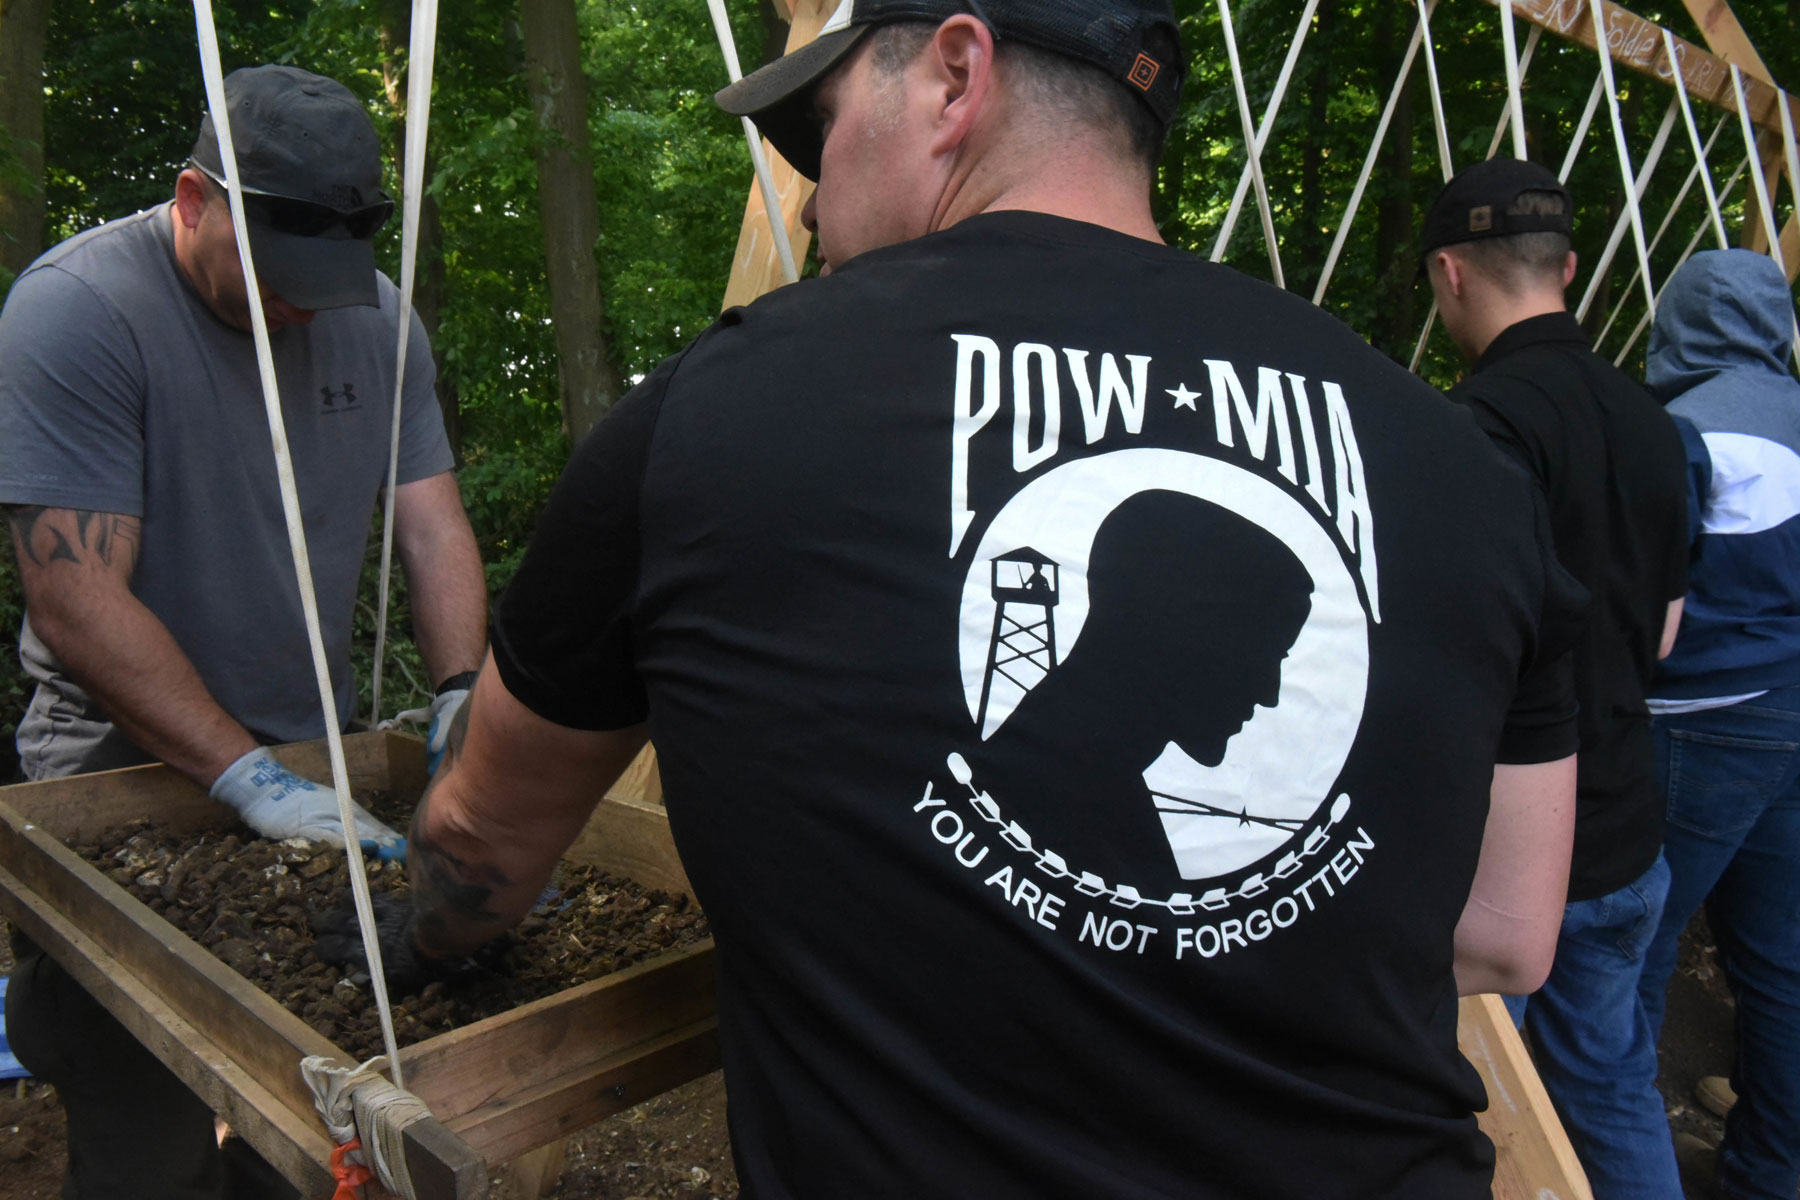 U.S. Army Sgt. 1st Class Nathan Fair, with the Defense POW/MIA Accounting Agency (DPAA) dry screens soil in search of remains in Boussicourt, France, May 22, 2018. (U.S. Army photo by Staff Sgt. Richard DeWitt)